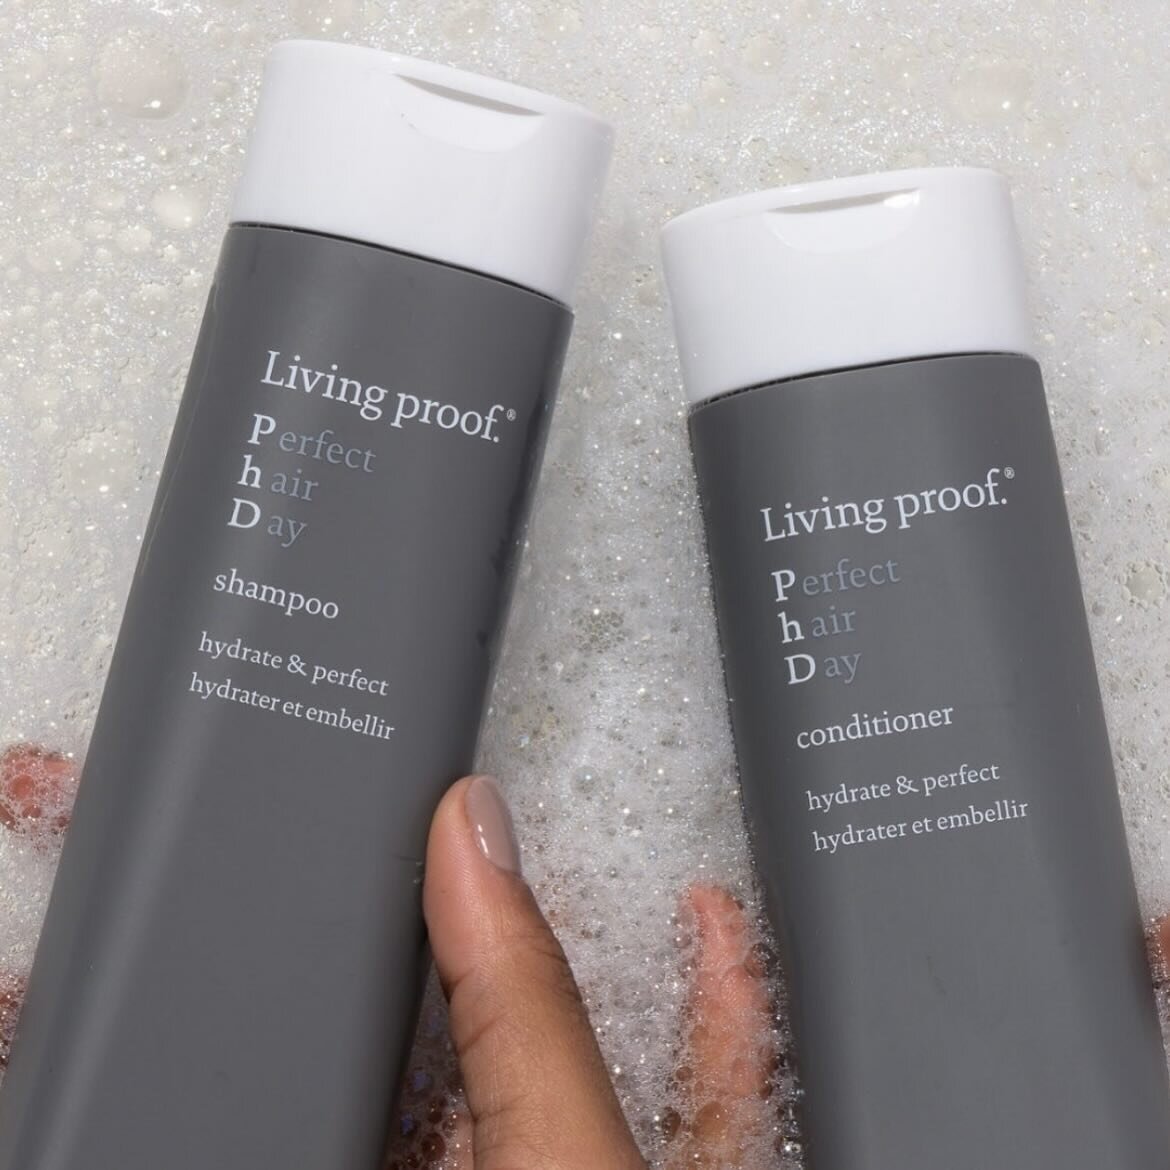 Refresh your hair this January with Living Proof!

Give your hair a January reset with the @livingproofuk PHD Shampoo and Conditioner.

Scientifically formulated to make hair 68% more shiny and 3x stronger after just one wash!

To purchase yours spea